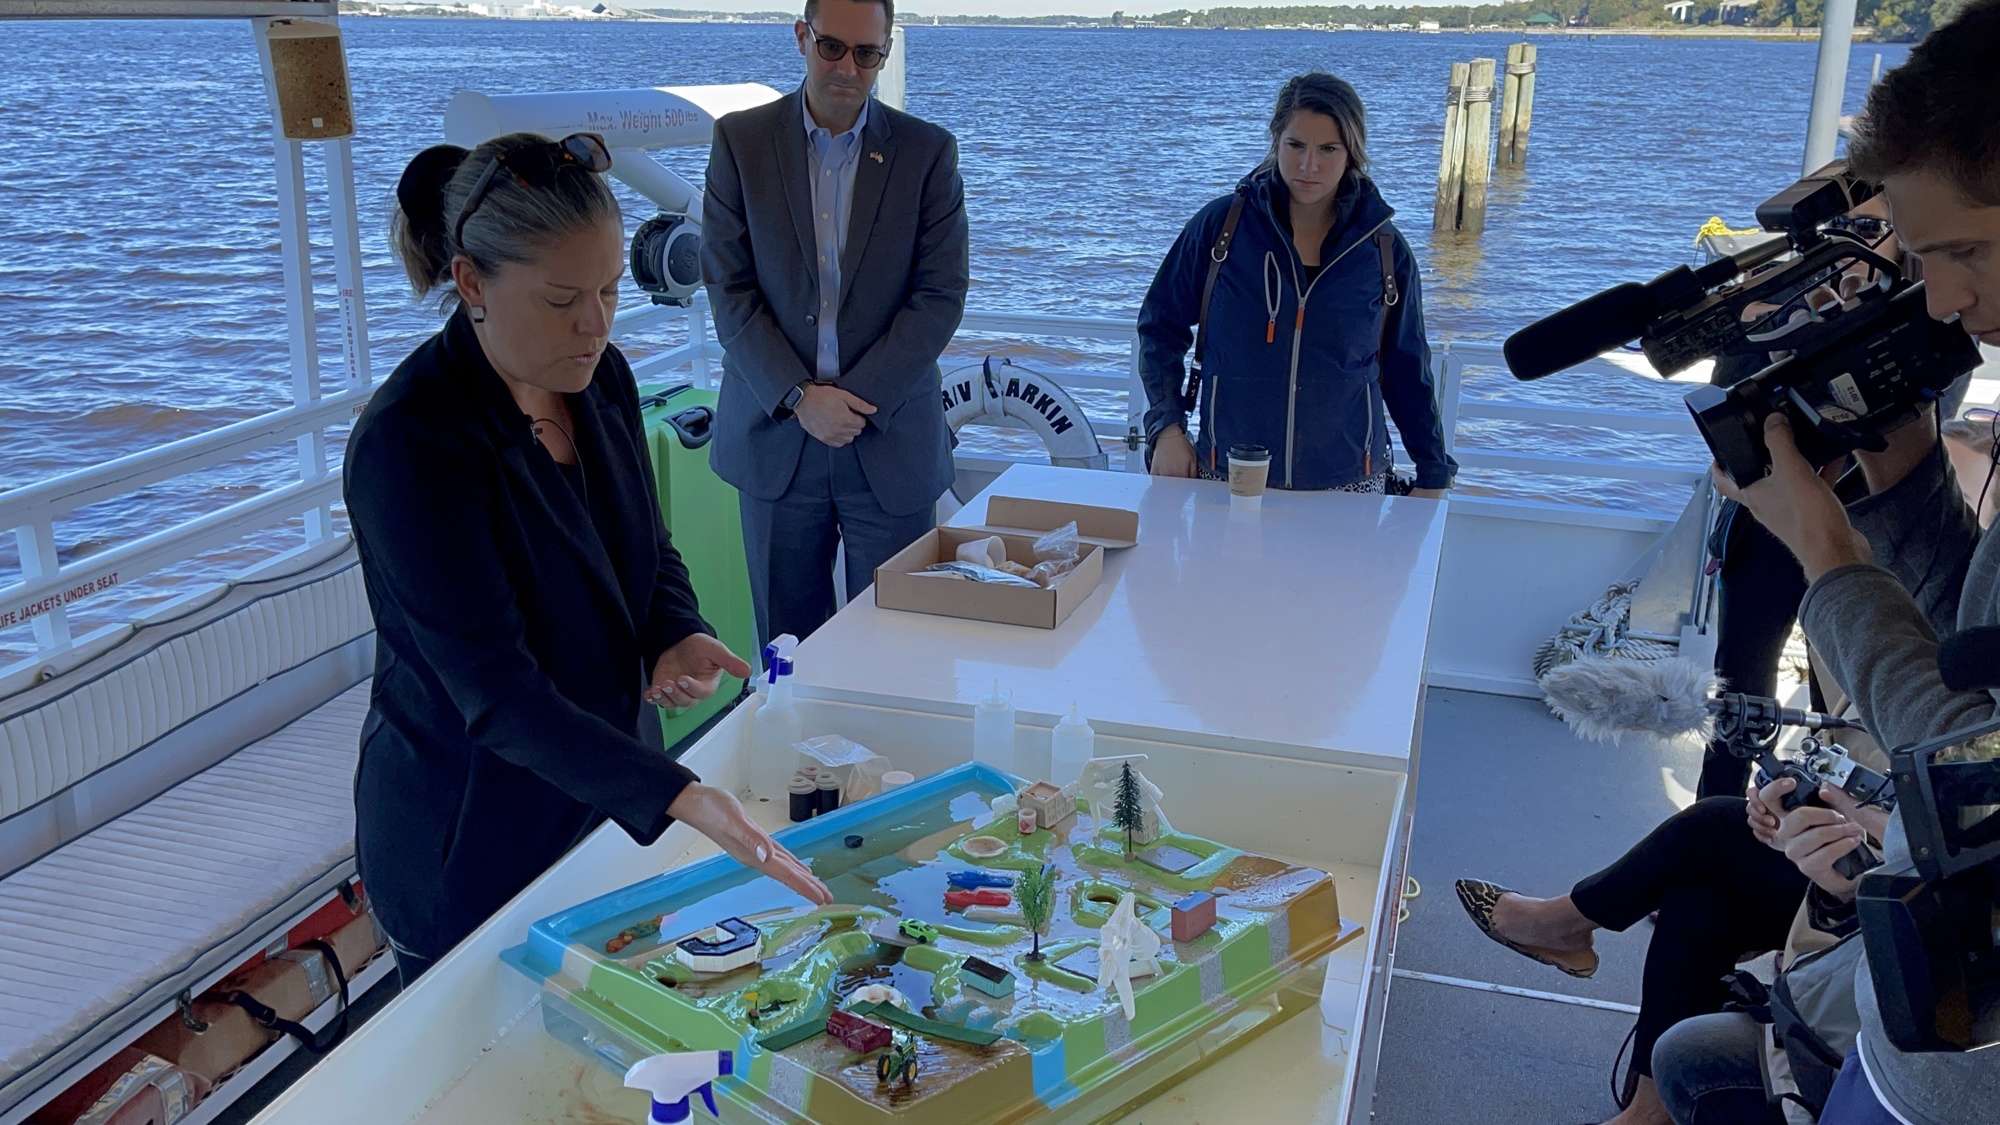 Jacksonville University Associate Professor Melinda Simmons demonstrates an EnviroScape model Nov. 15 that shows how pollutants impact the health St. Johns River watersheds, part of the university’s “Connected” initiative.